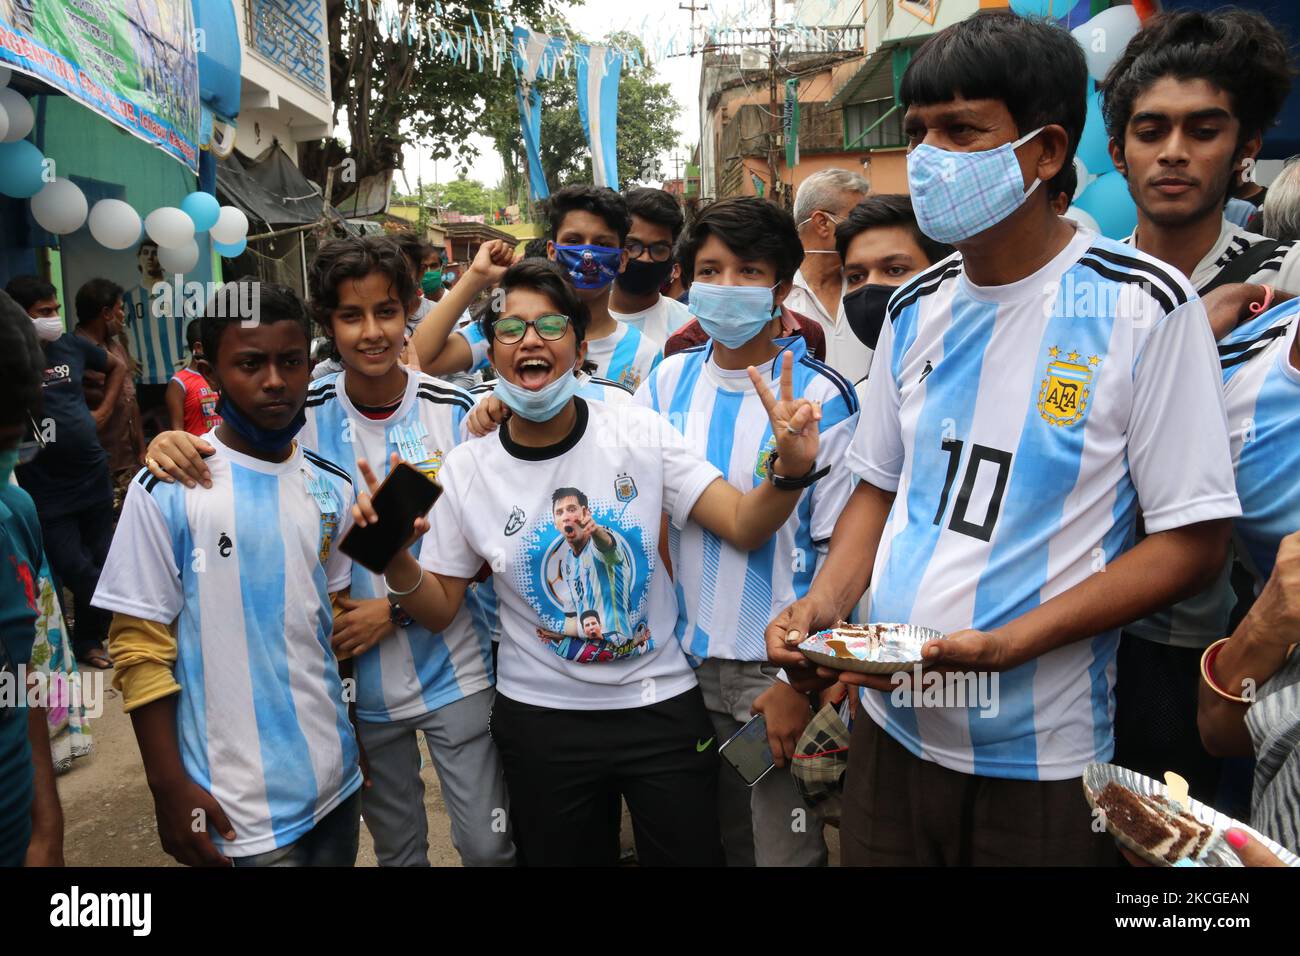 Shib Shankar Patra ( R ) , football fan of Argentina team, with Argentina fans Club members during 34th birthday celebration of the world famous professional footballer Lionel Messi at North 24 Pargana Kolkata to 27 Kilometer distances north, West Bengal, India, on June 24, 2021. (Photo by Debajyoti Chakraborty/NurPhoto) Stock Photo